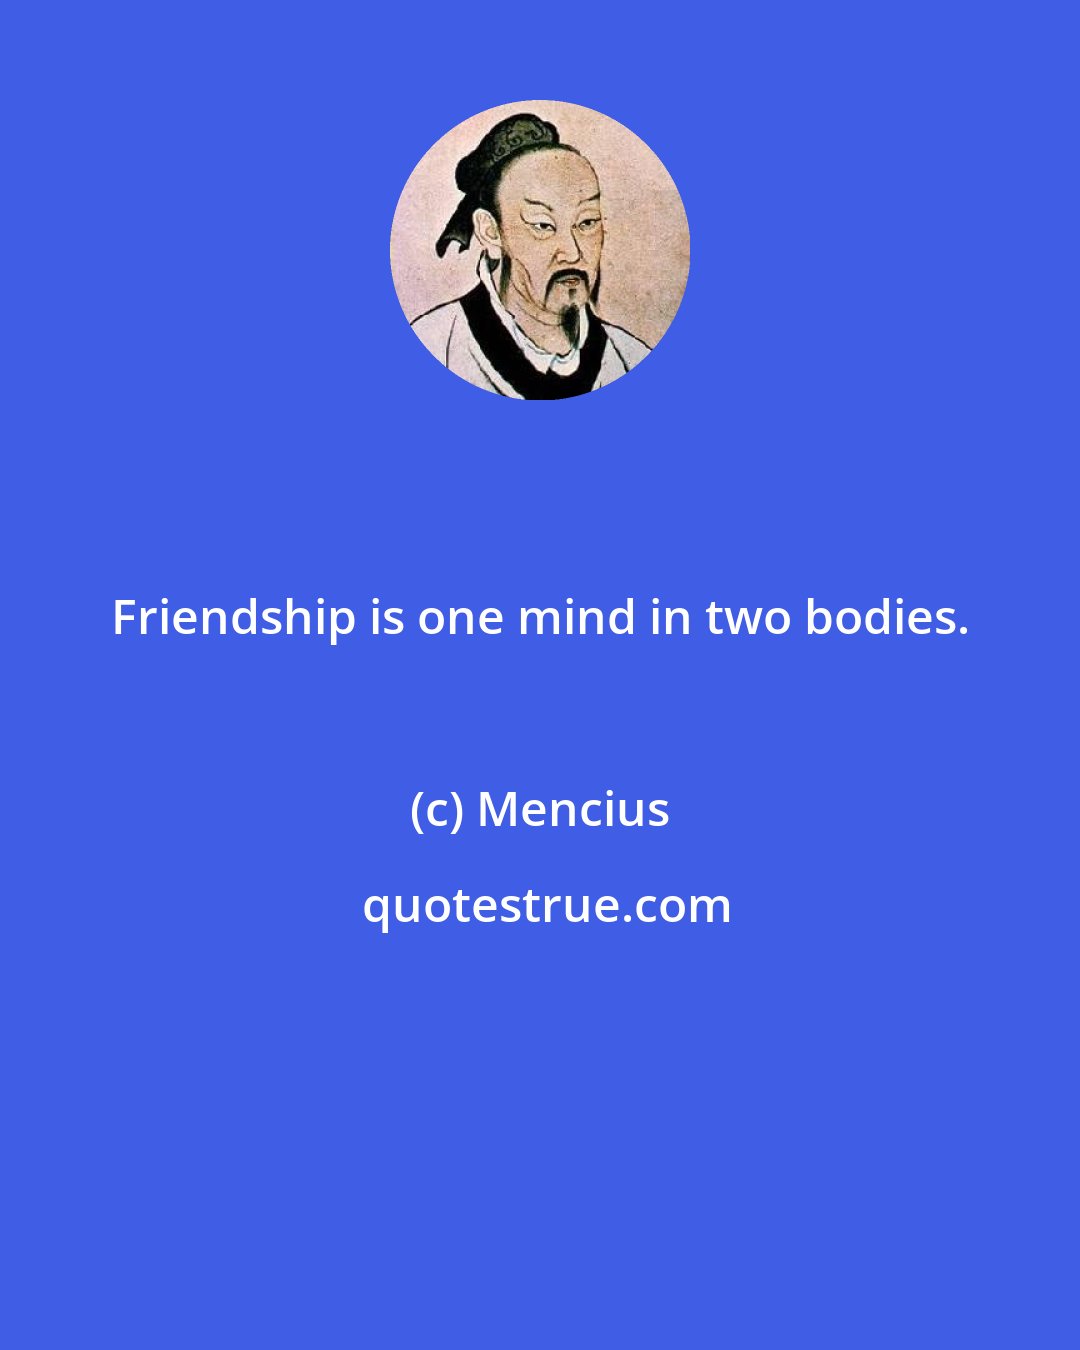 Mencius: Friendship is one mind in two bodies.